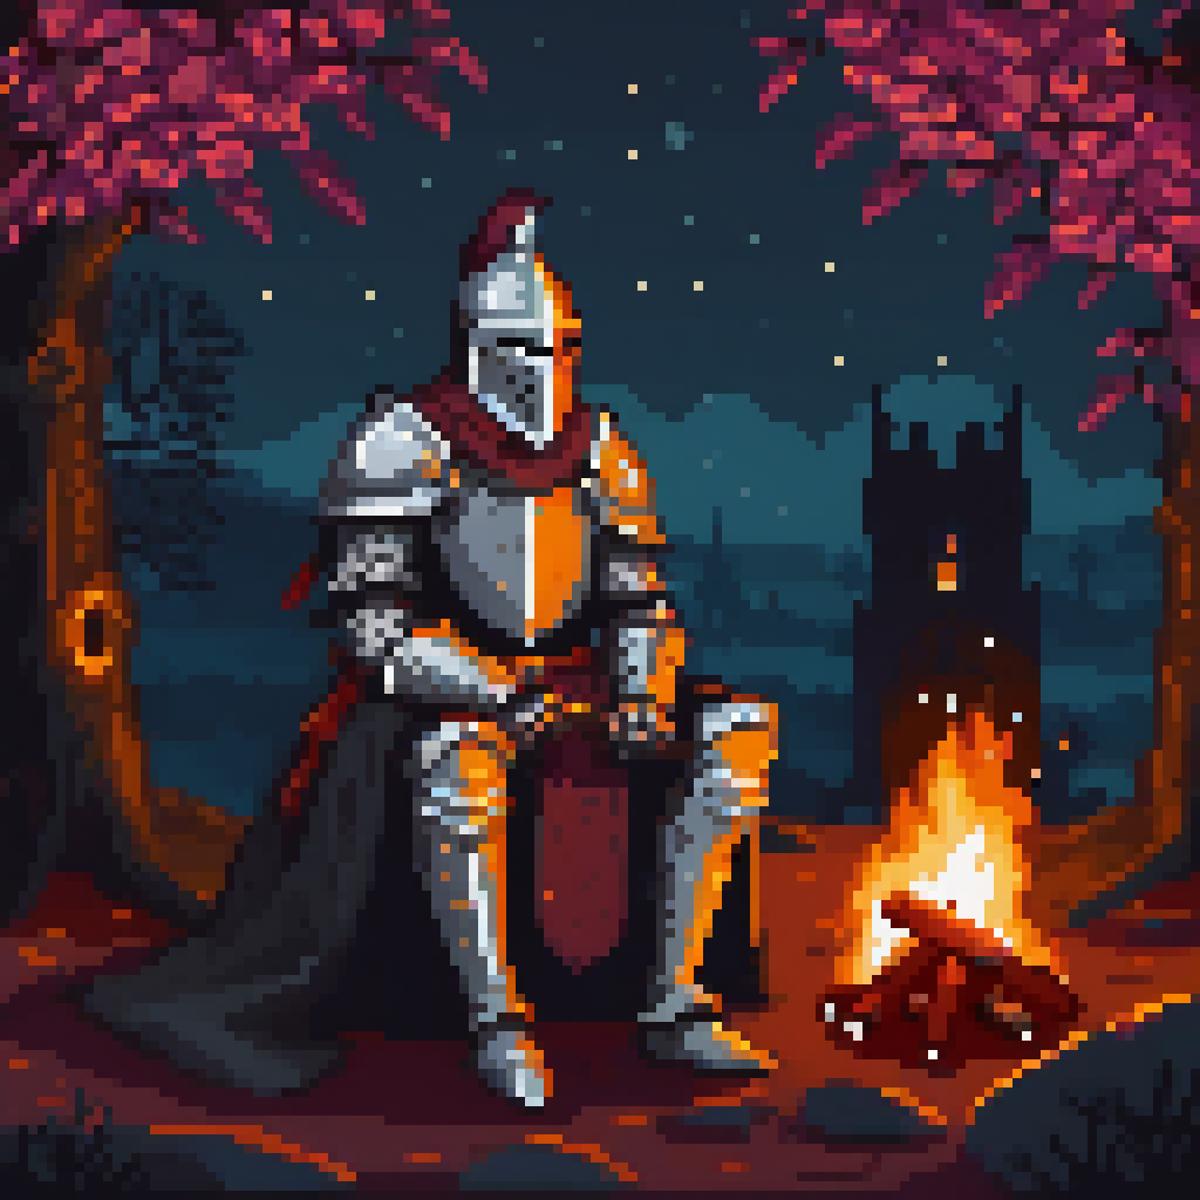 A knight in armor sitting by a campfire at night.